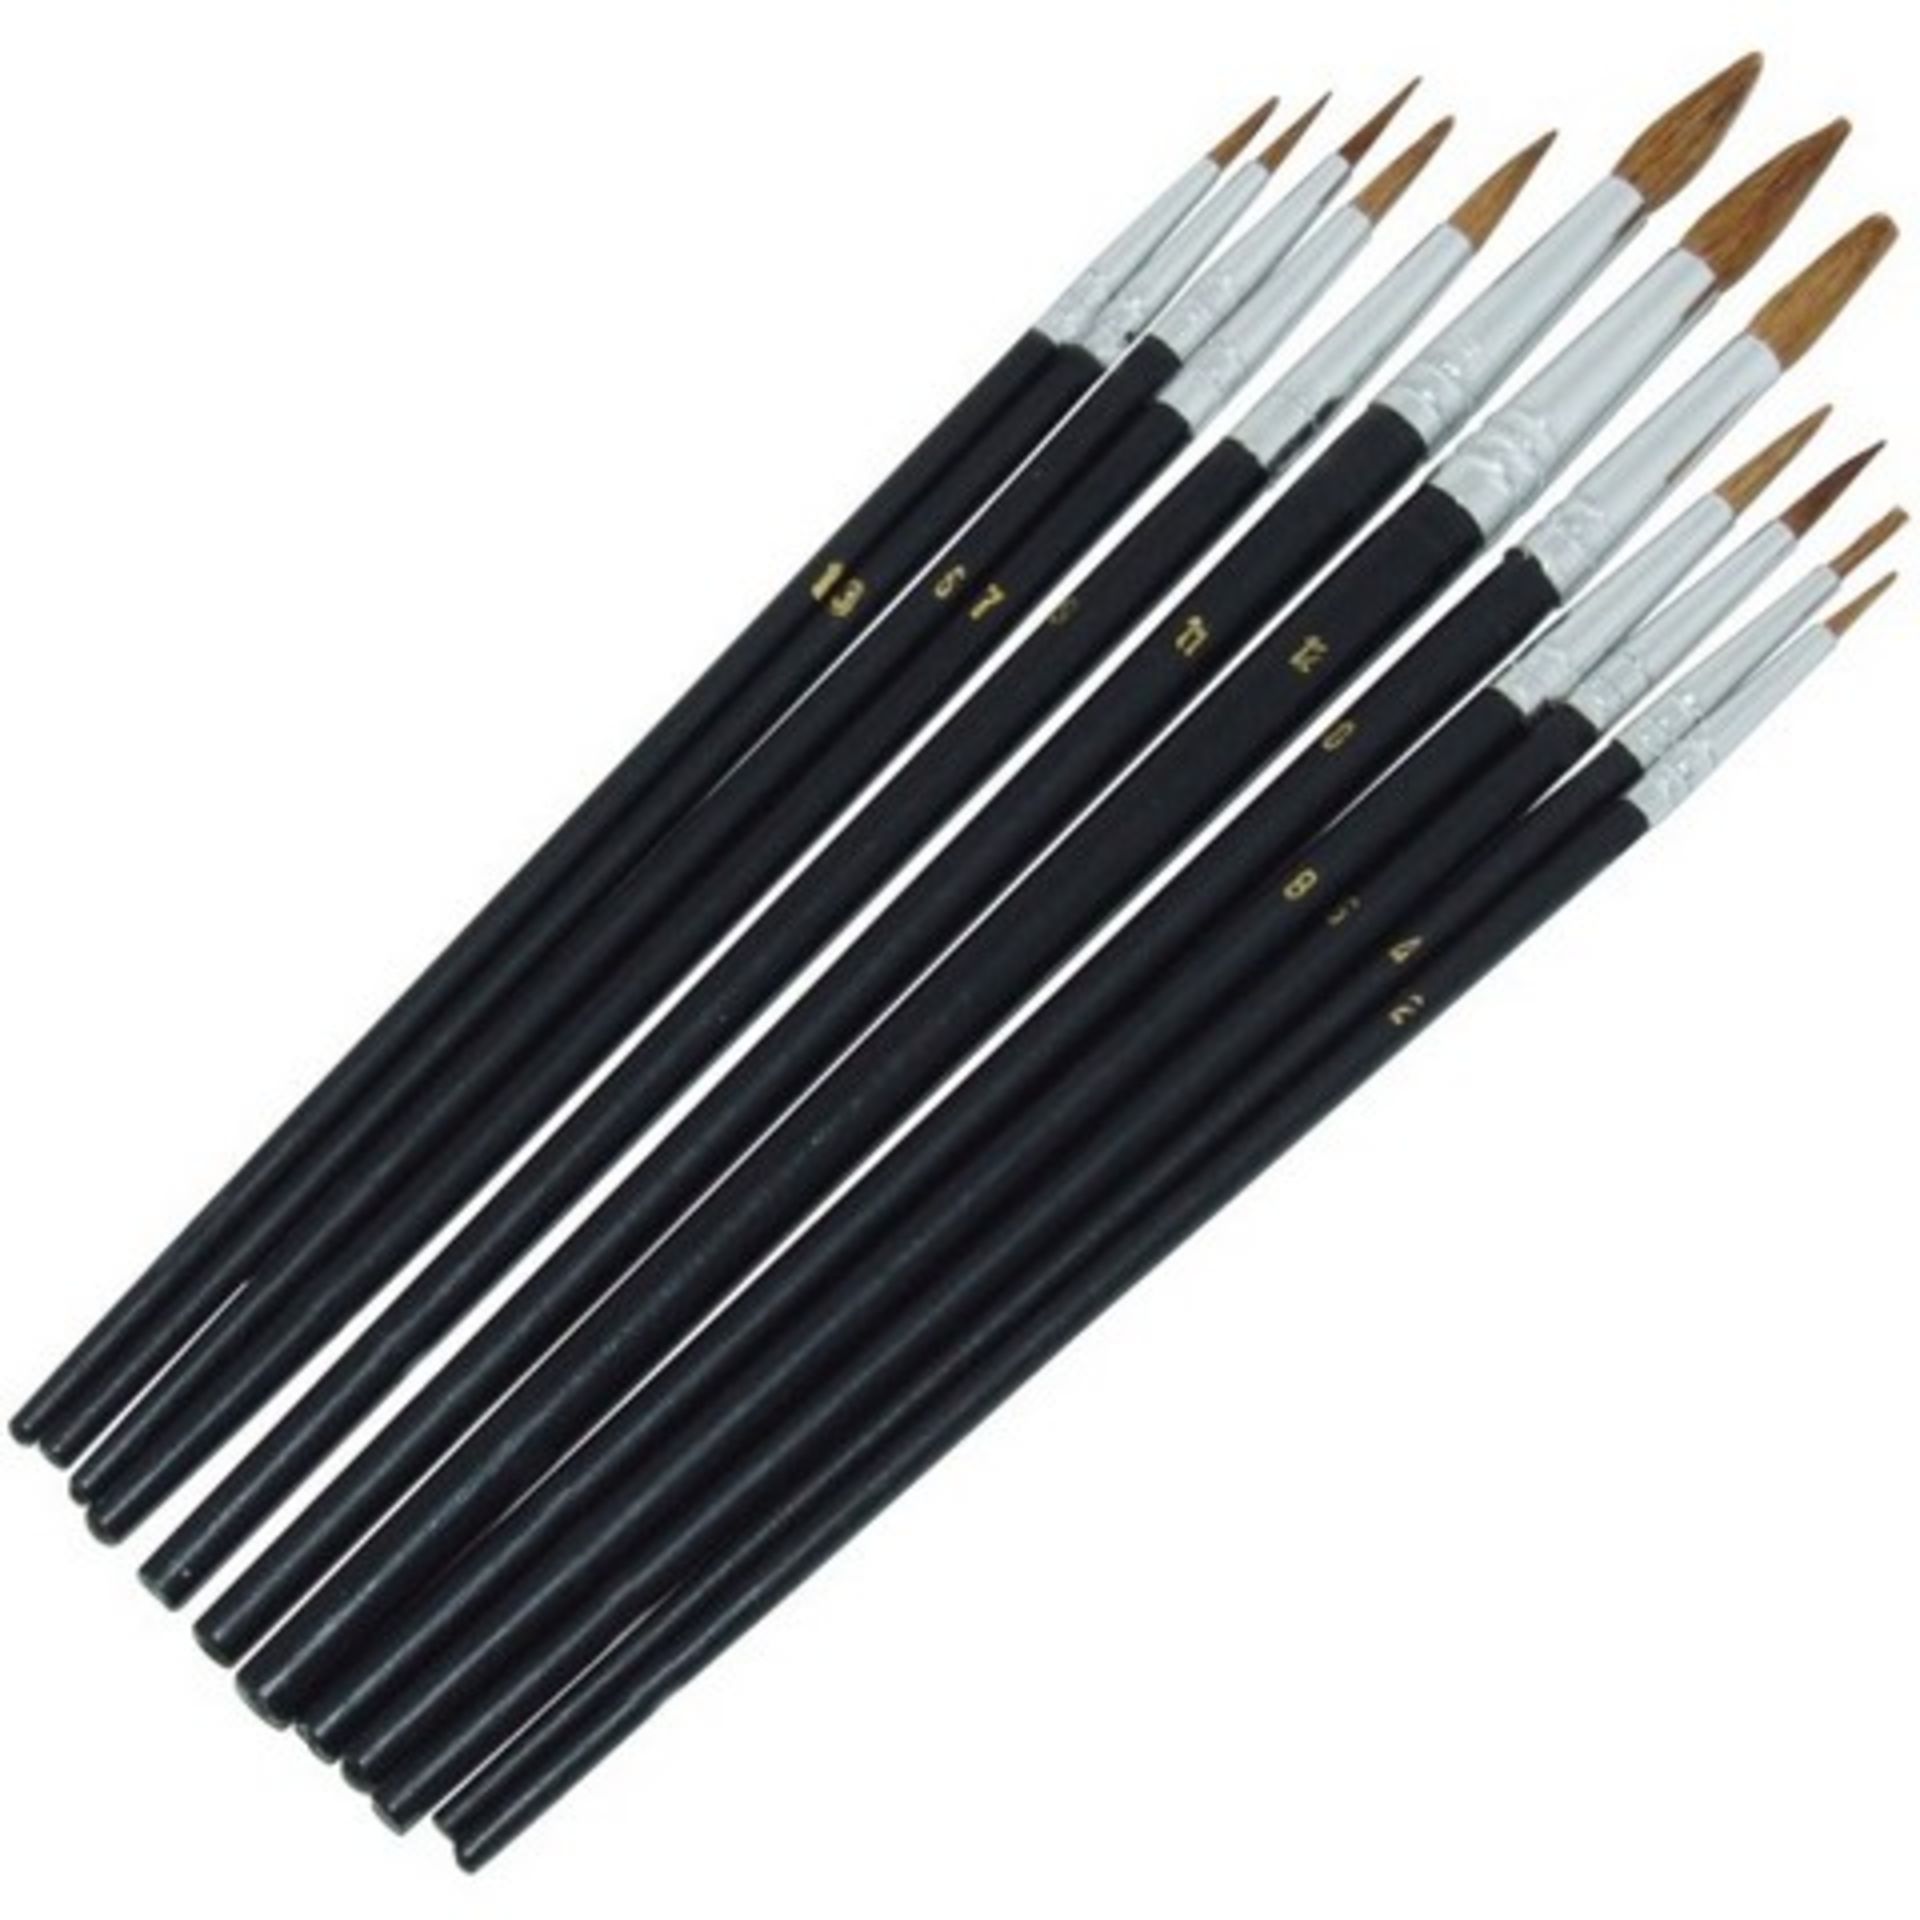 + VAT Brand New 15pc Paint Brush Set Being Suitable For Watercolours And Oils/Model Making Etc - Image 2 of 2